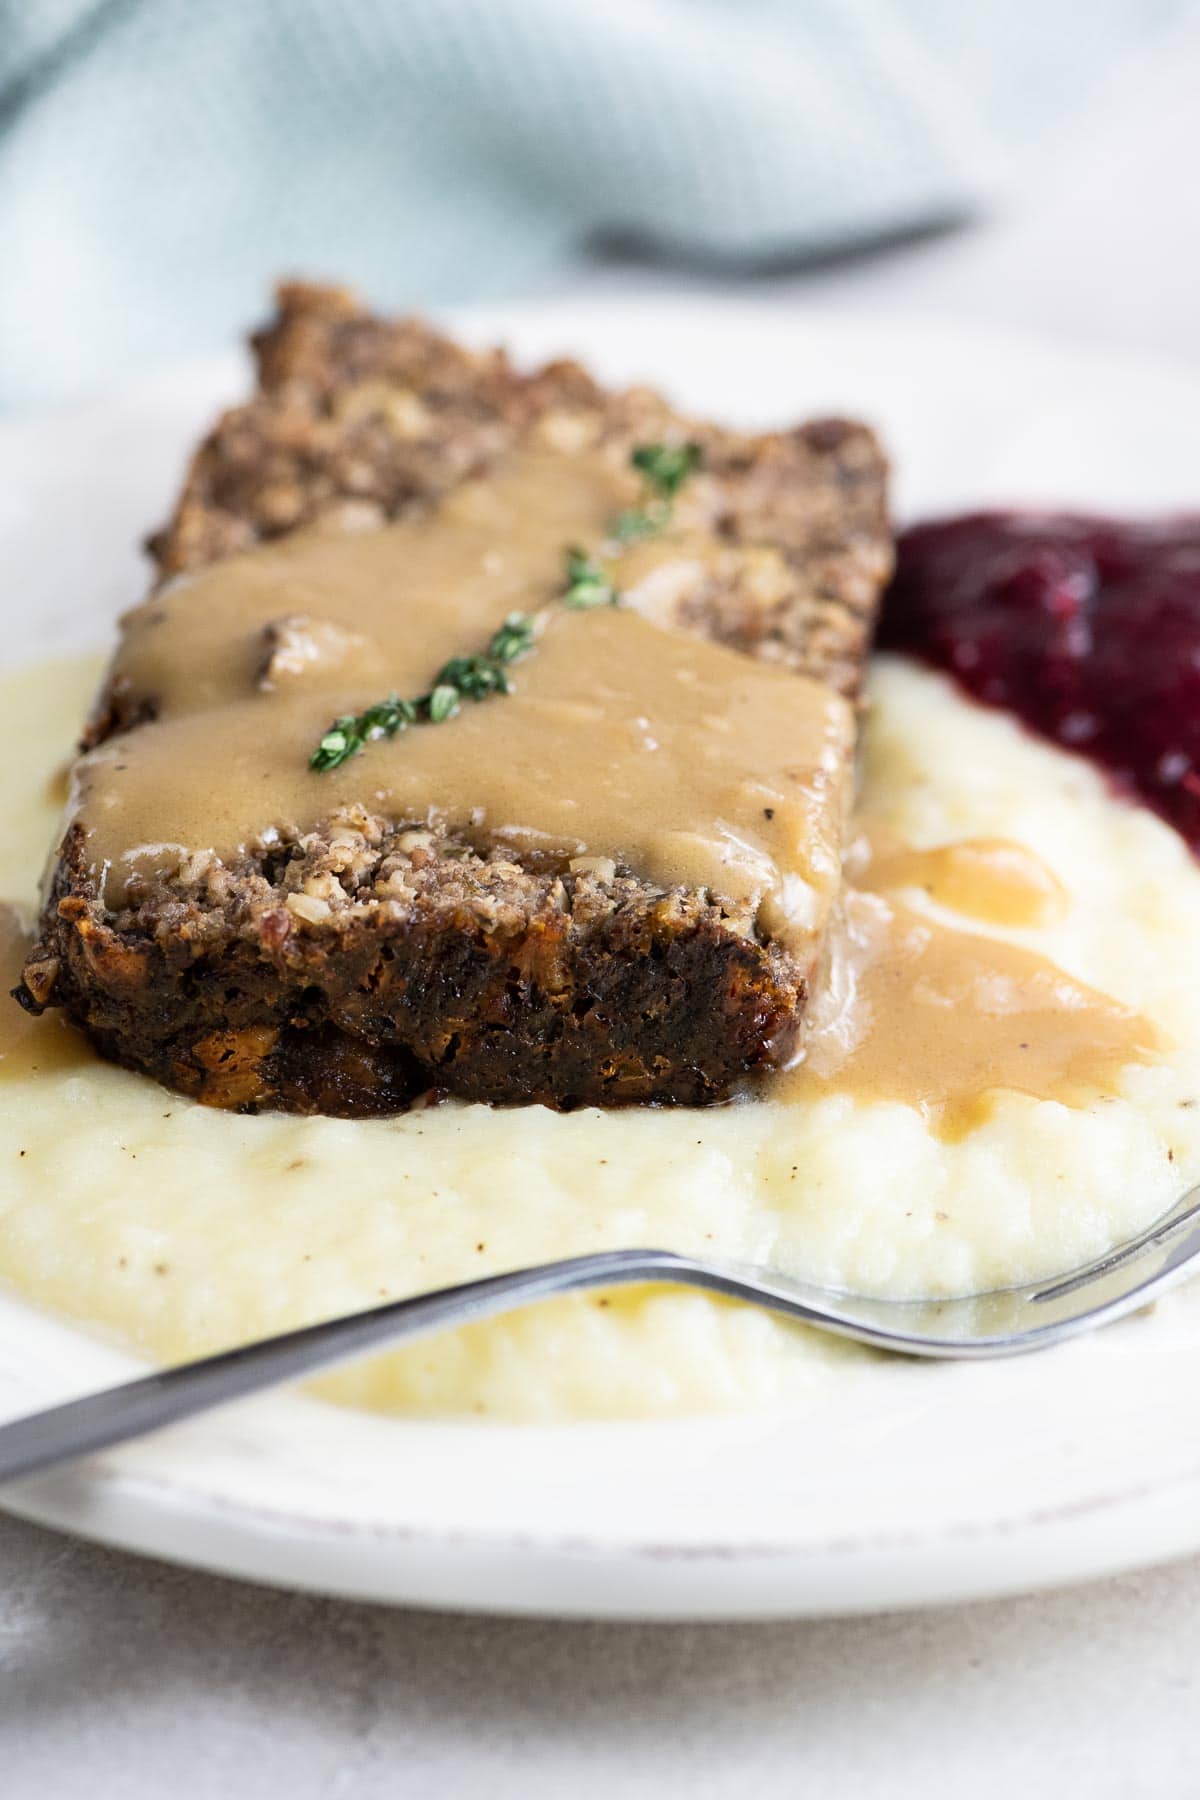 veggie meatloaf (nut loaf) with mashed potatoes, gravy, and cranberry sauce on a plate